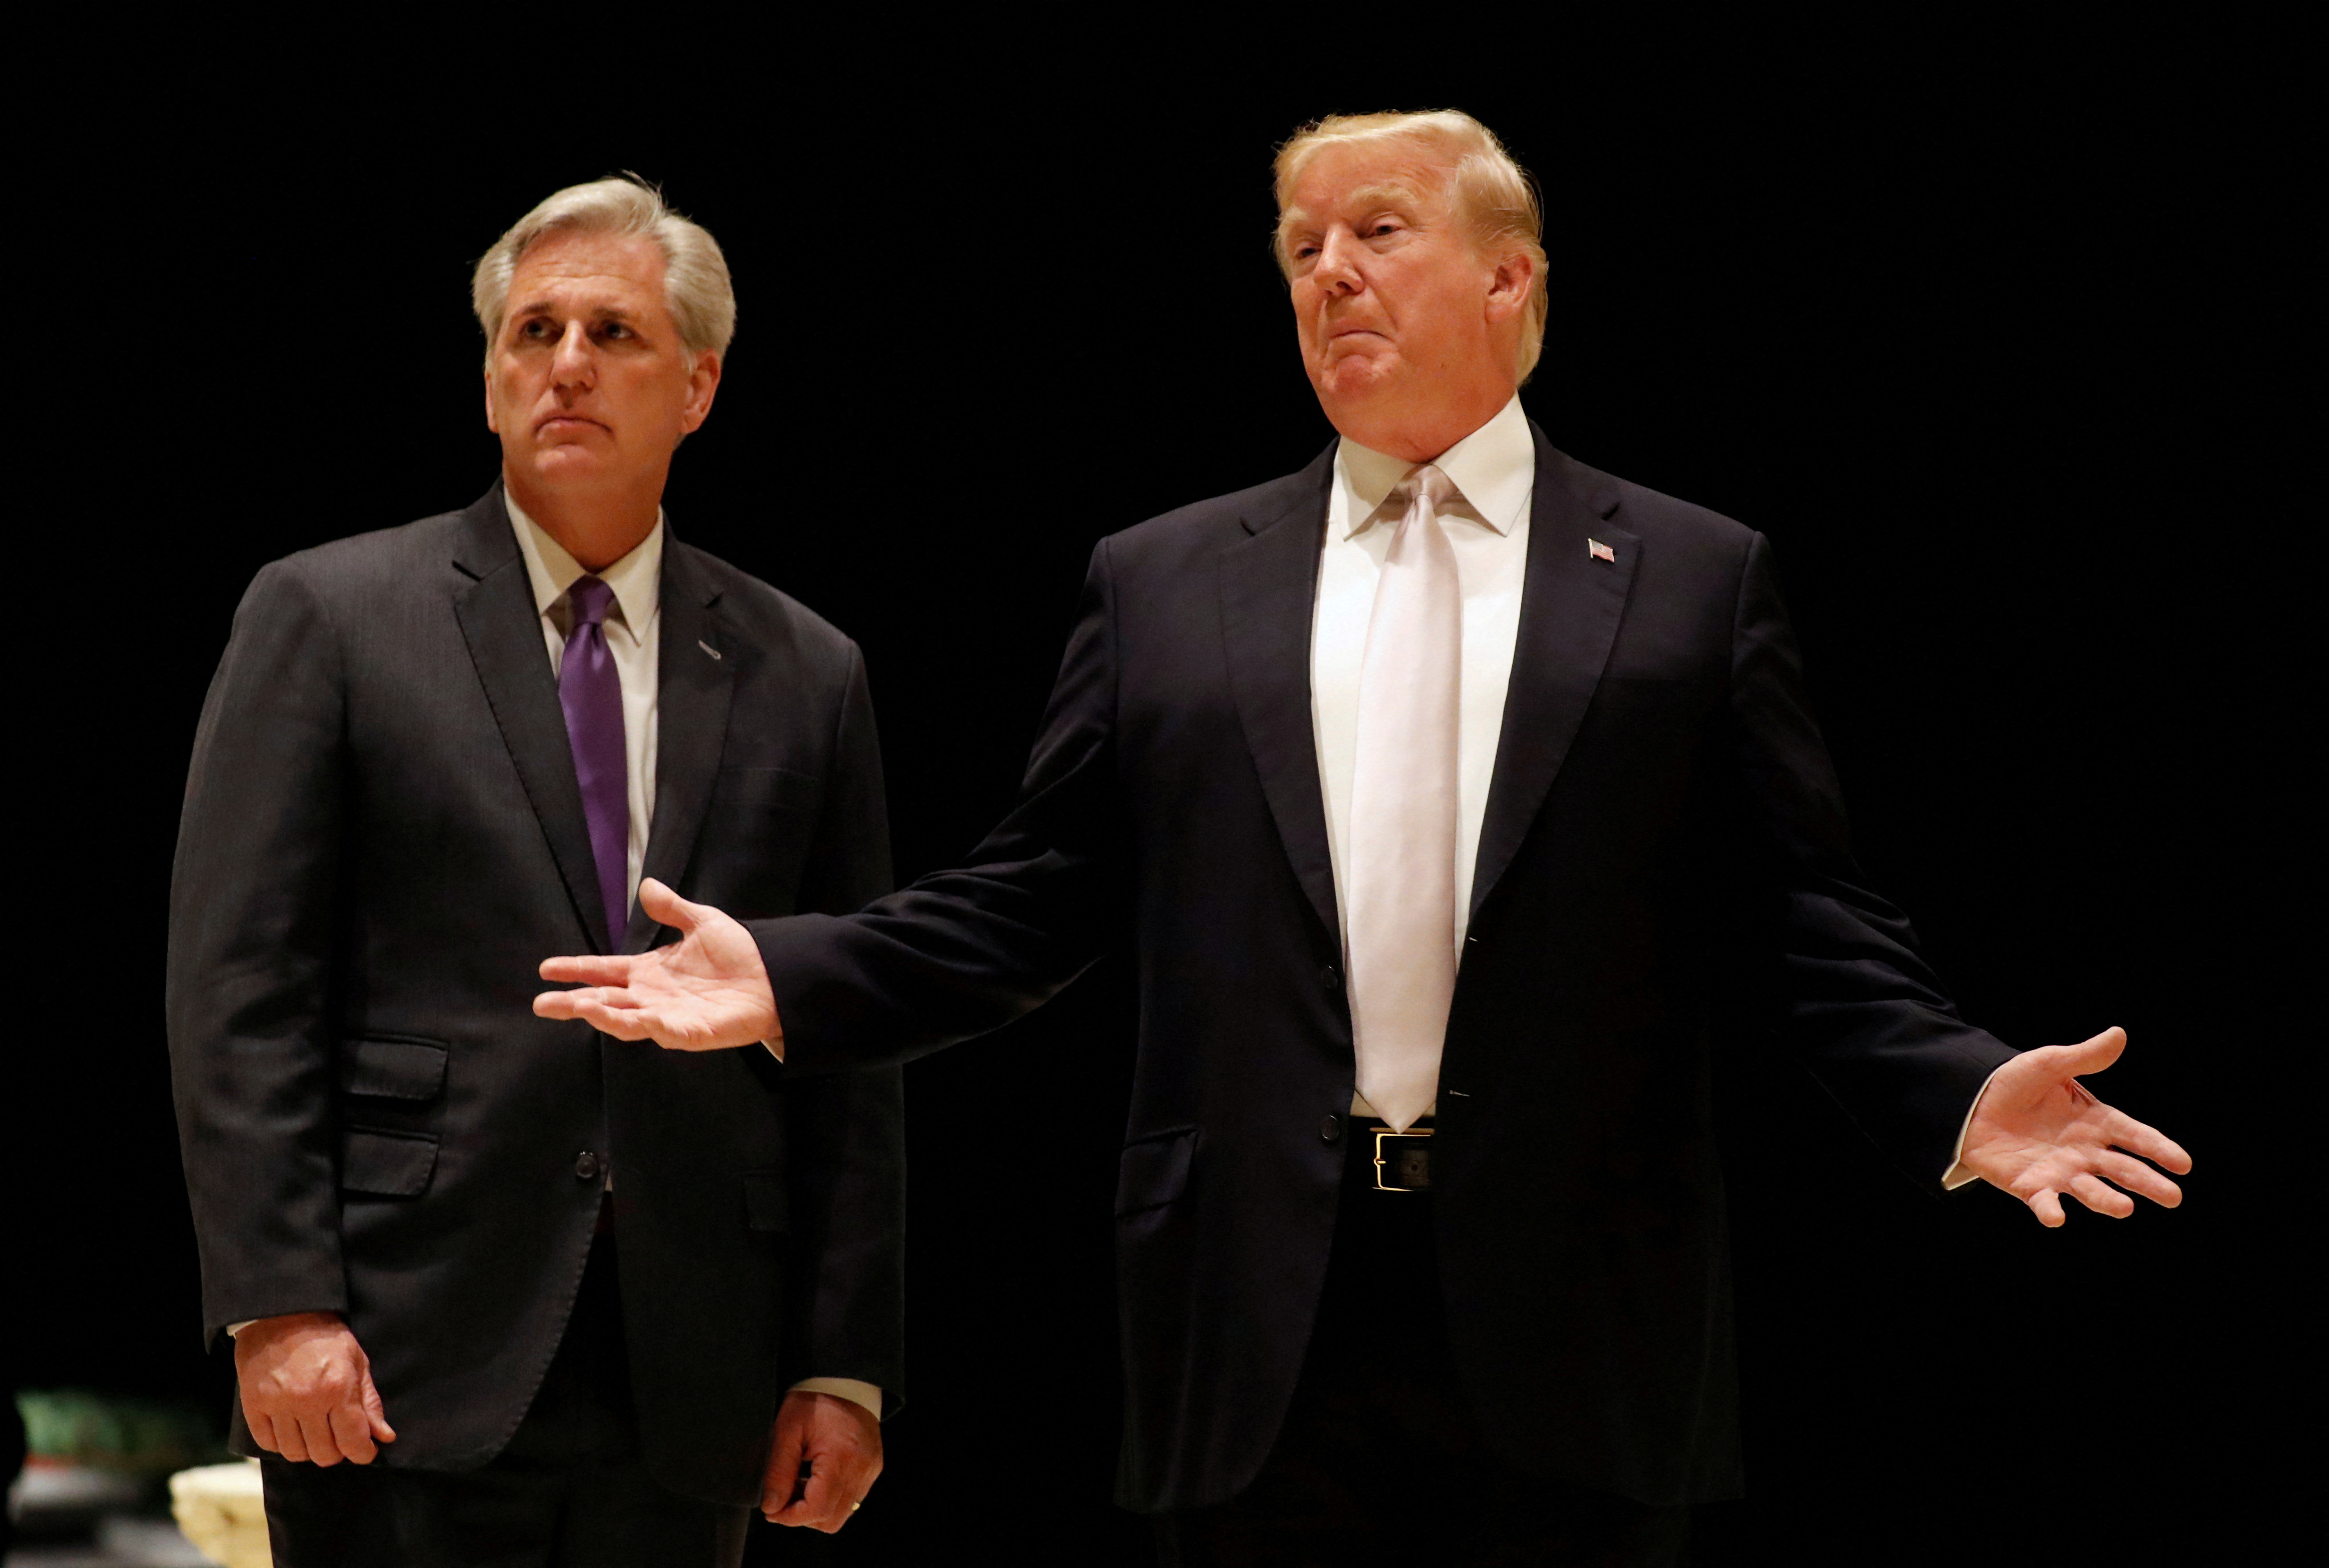 US President Donald Trump with House Majority Leader Kevin McCarthy